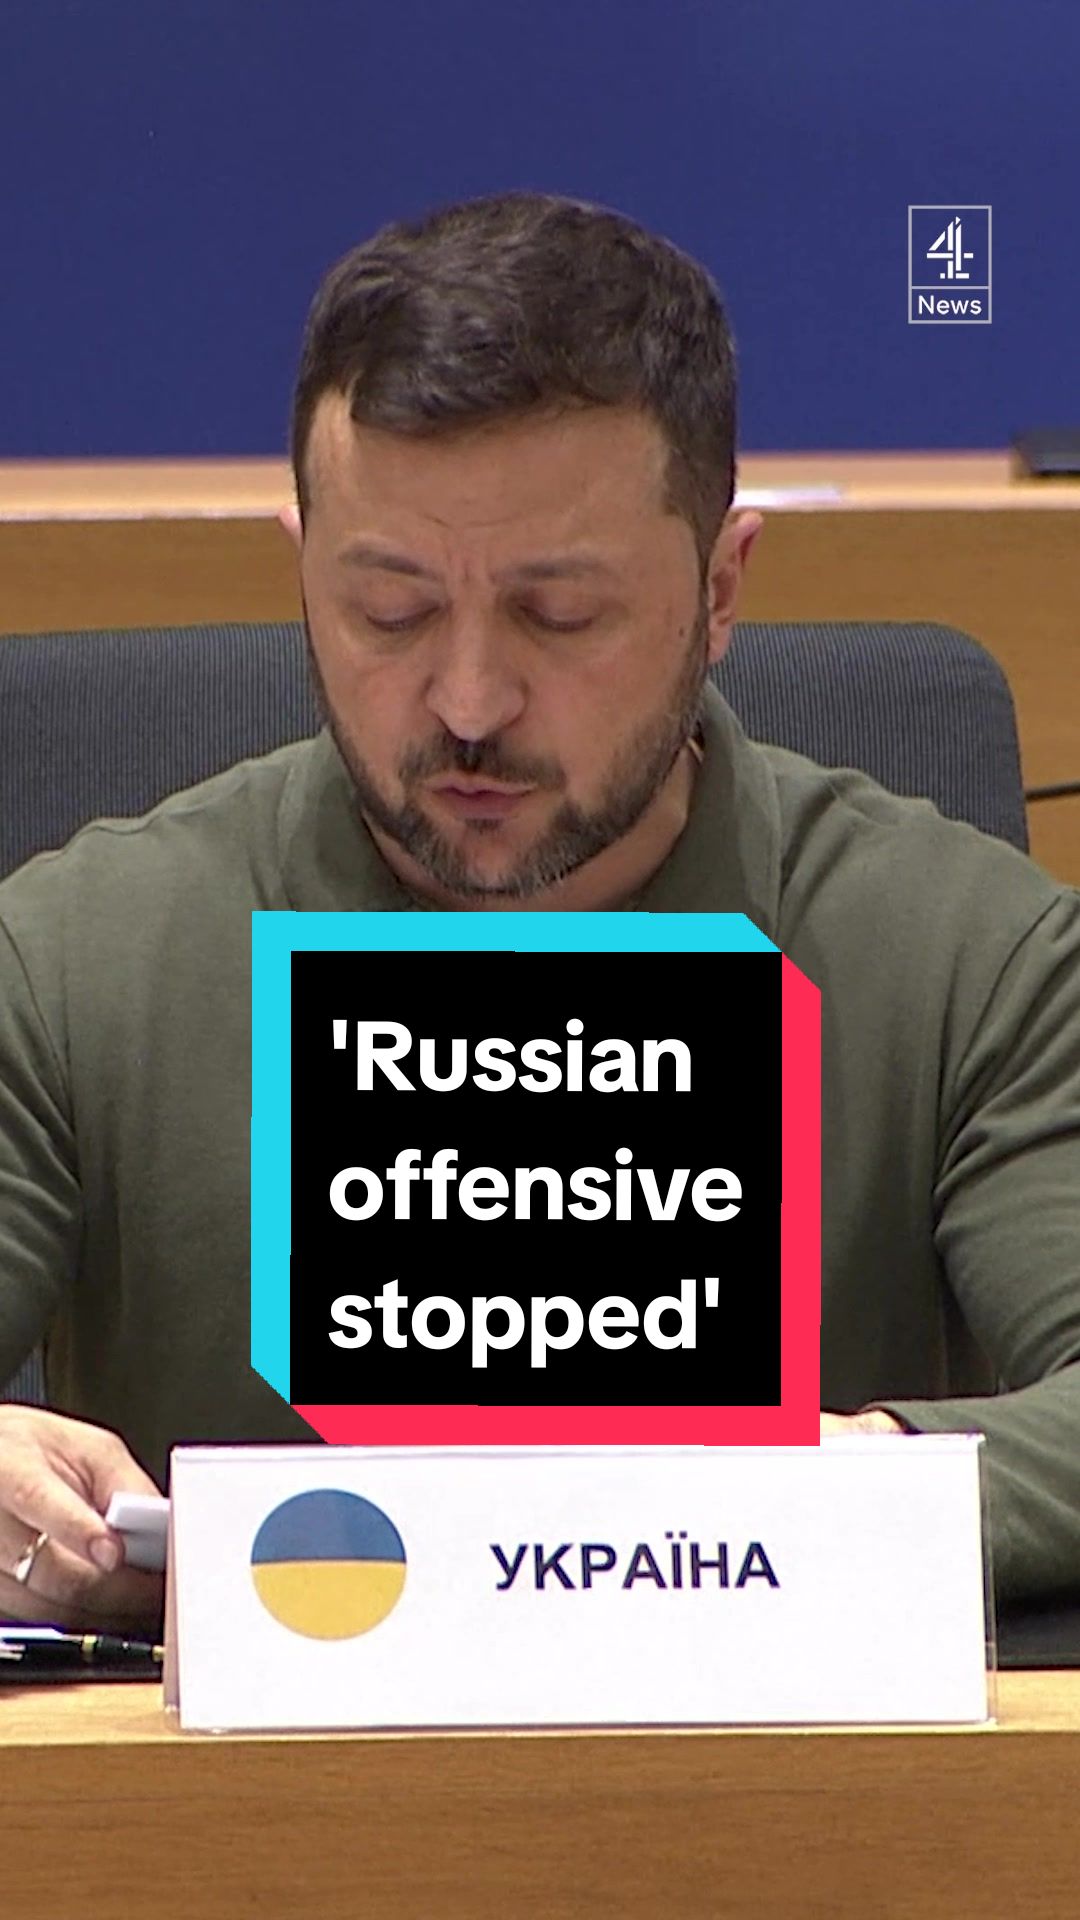 Russia's offensive in the east of Ukraine has been halted, says President Zelenskyy. "We stopped this Russian offensive" with your help, the Ukrainian president told EU leaders in Brussels. #Ukraine #Russia #Zelenskyy #UkraineWar #C4News